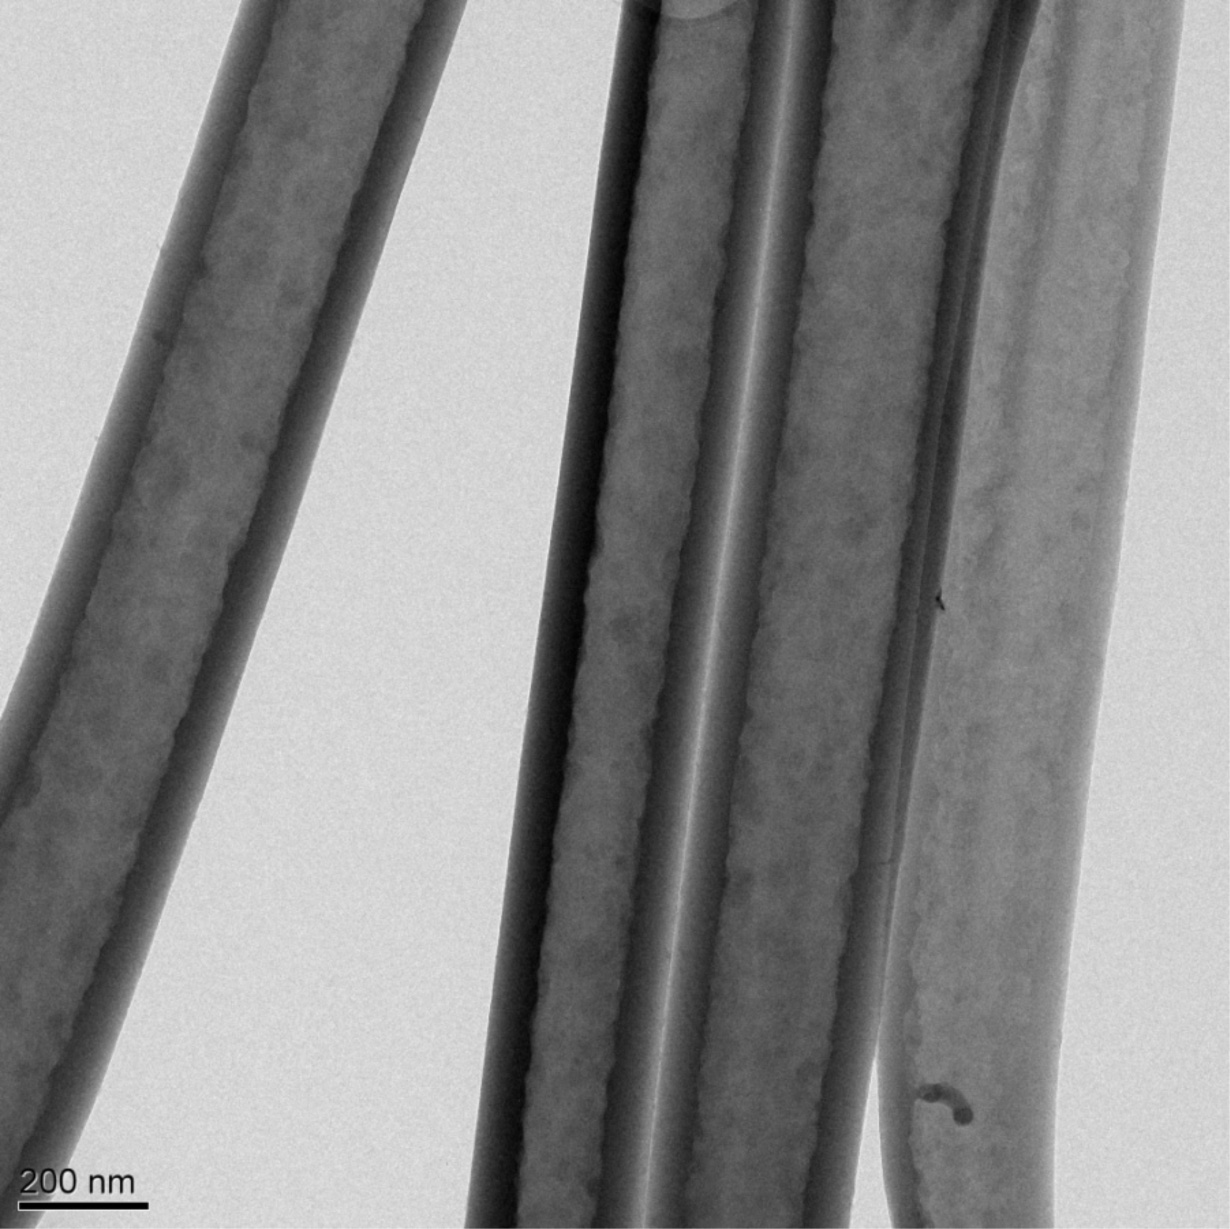 This transmission electron microscope image shows four polymer nanofibers with hollow structure. The thickness of the walls of the tubes ranged from 40 to 80 nanometers, depending on the amount of current applied and the growth time. (Credit: Ye Cai)